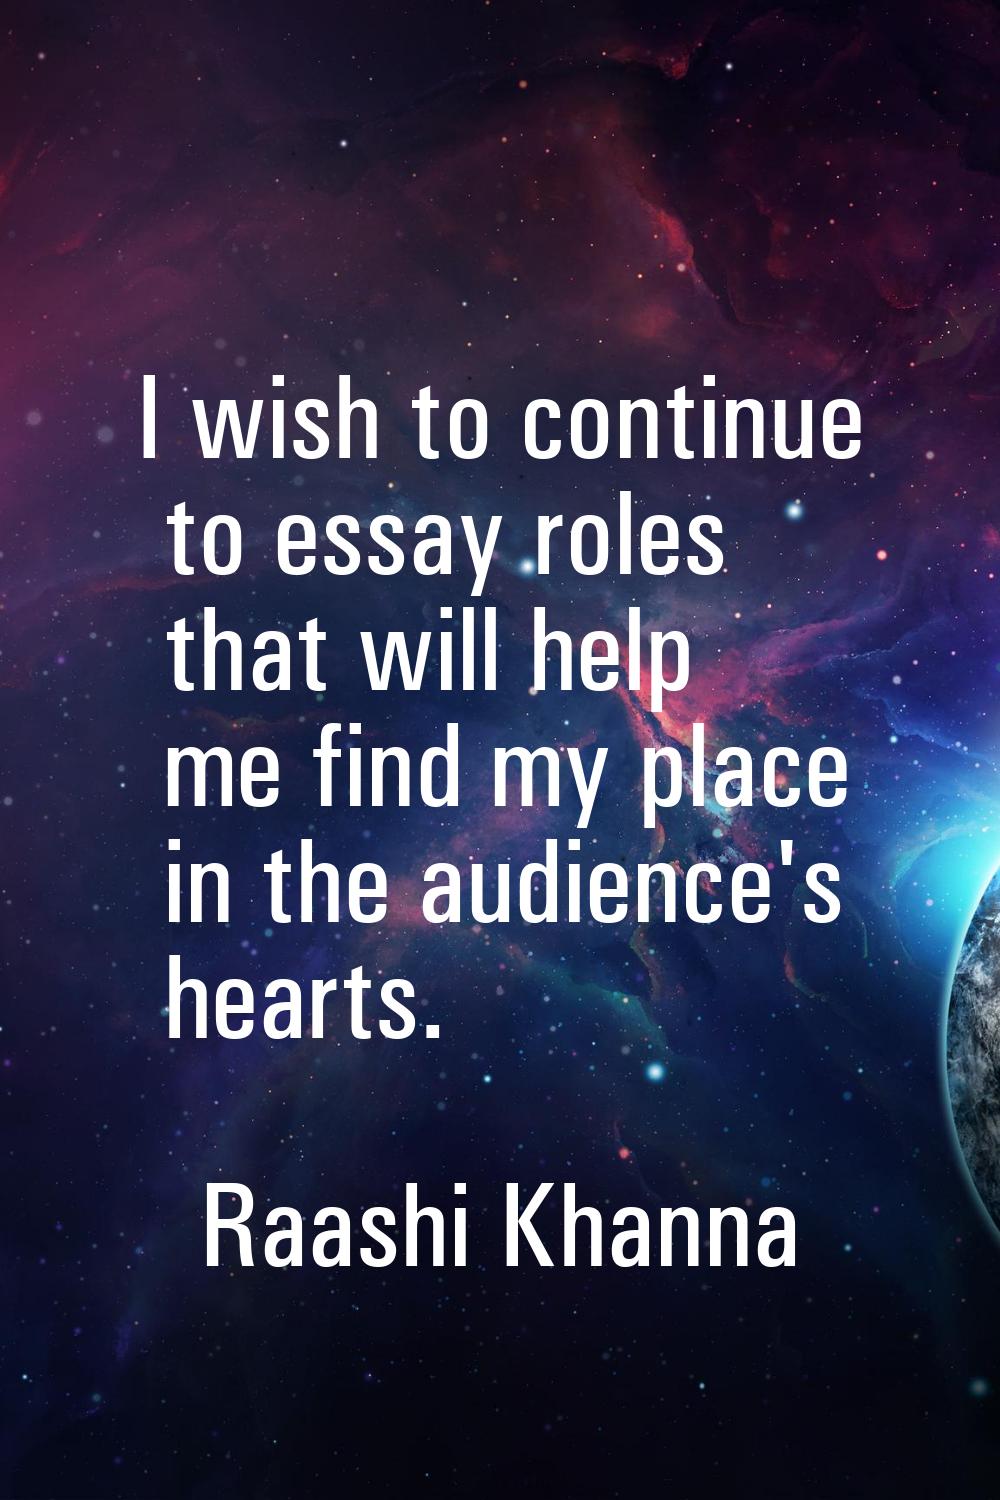 I wish to continue to essay roles that will help me find my place in the audience's hearts.